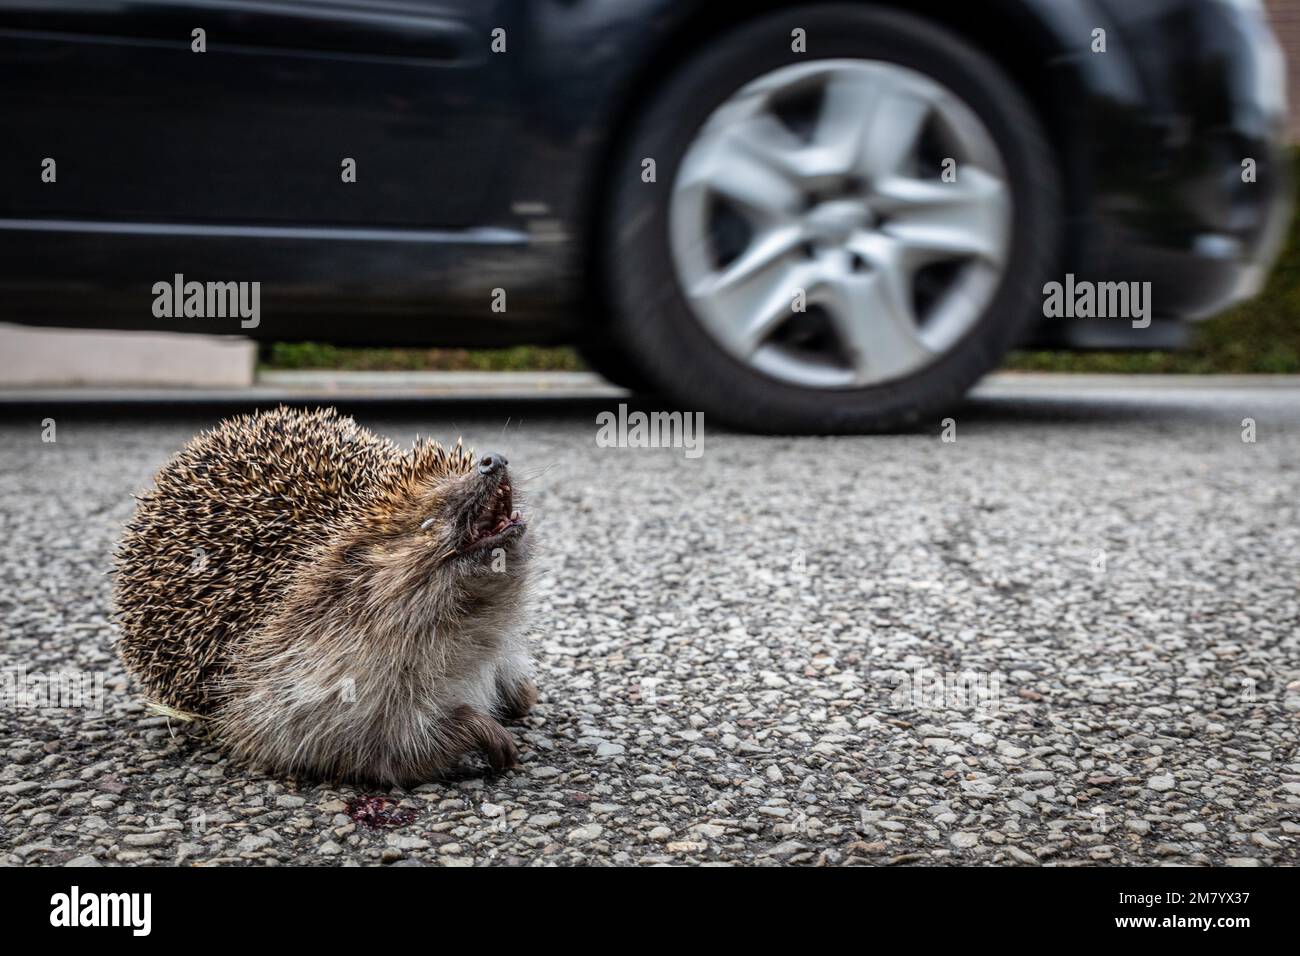 HEDGEHOG THAT HAS BEEN RUN OVER BY A CAR ON THE ROAD, RUGLES, EURE, NORMANDY, FRANCE Stock Photo